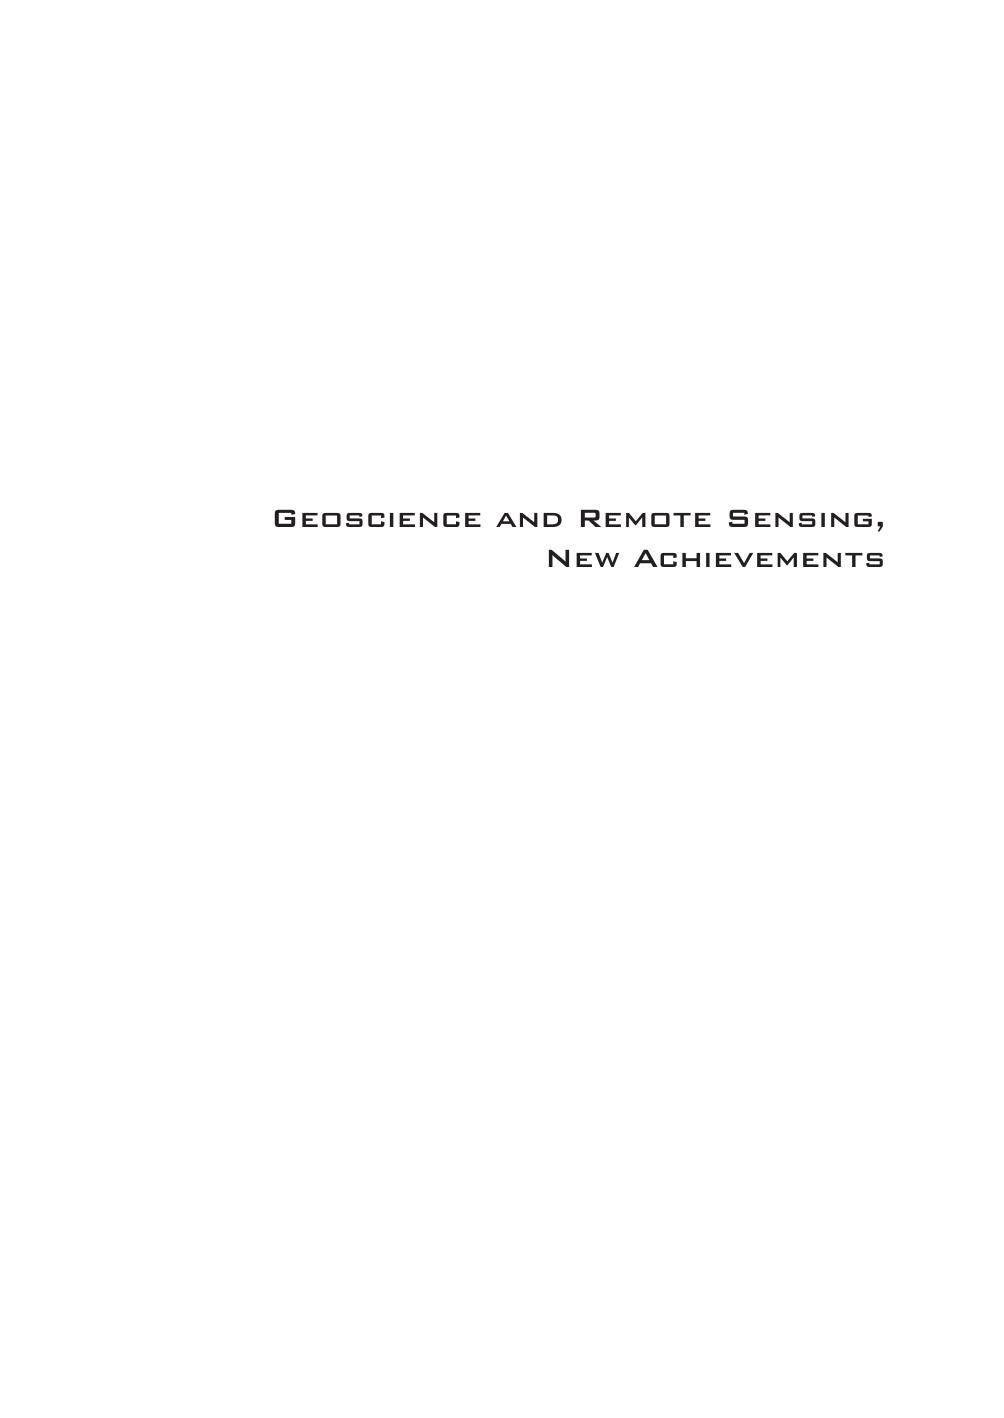 Geoscience and Remote Sensing, New Achievements. 2010